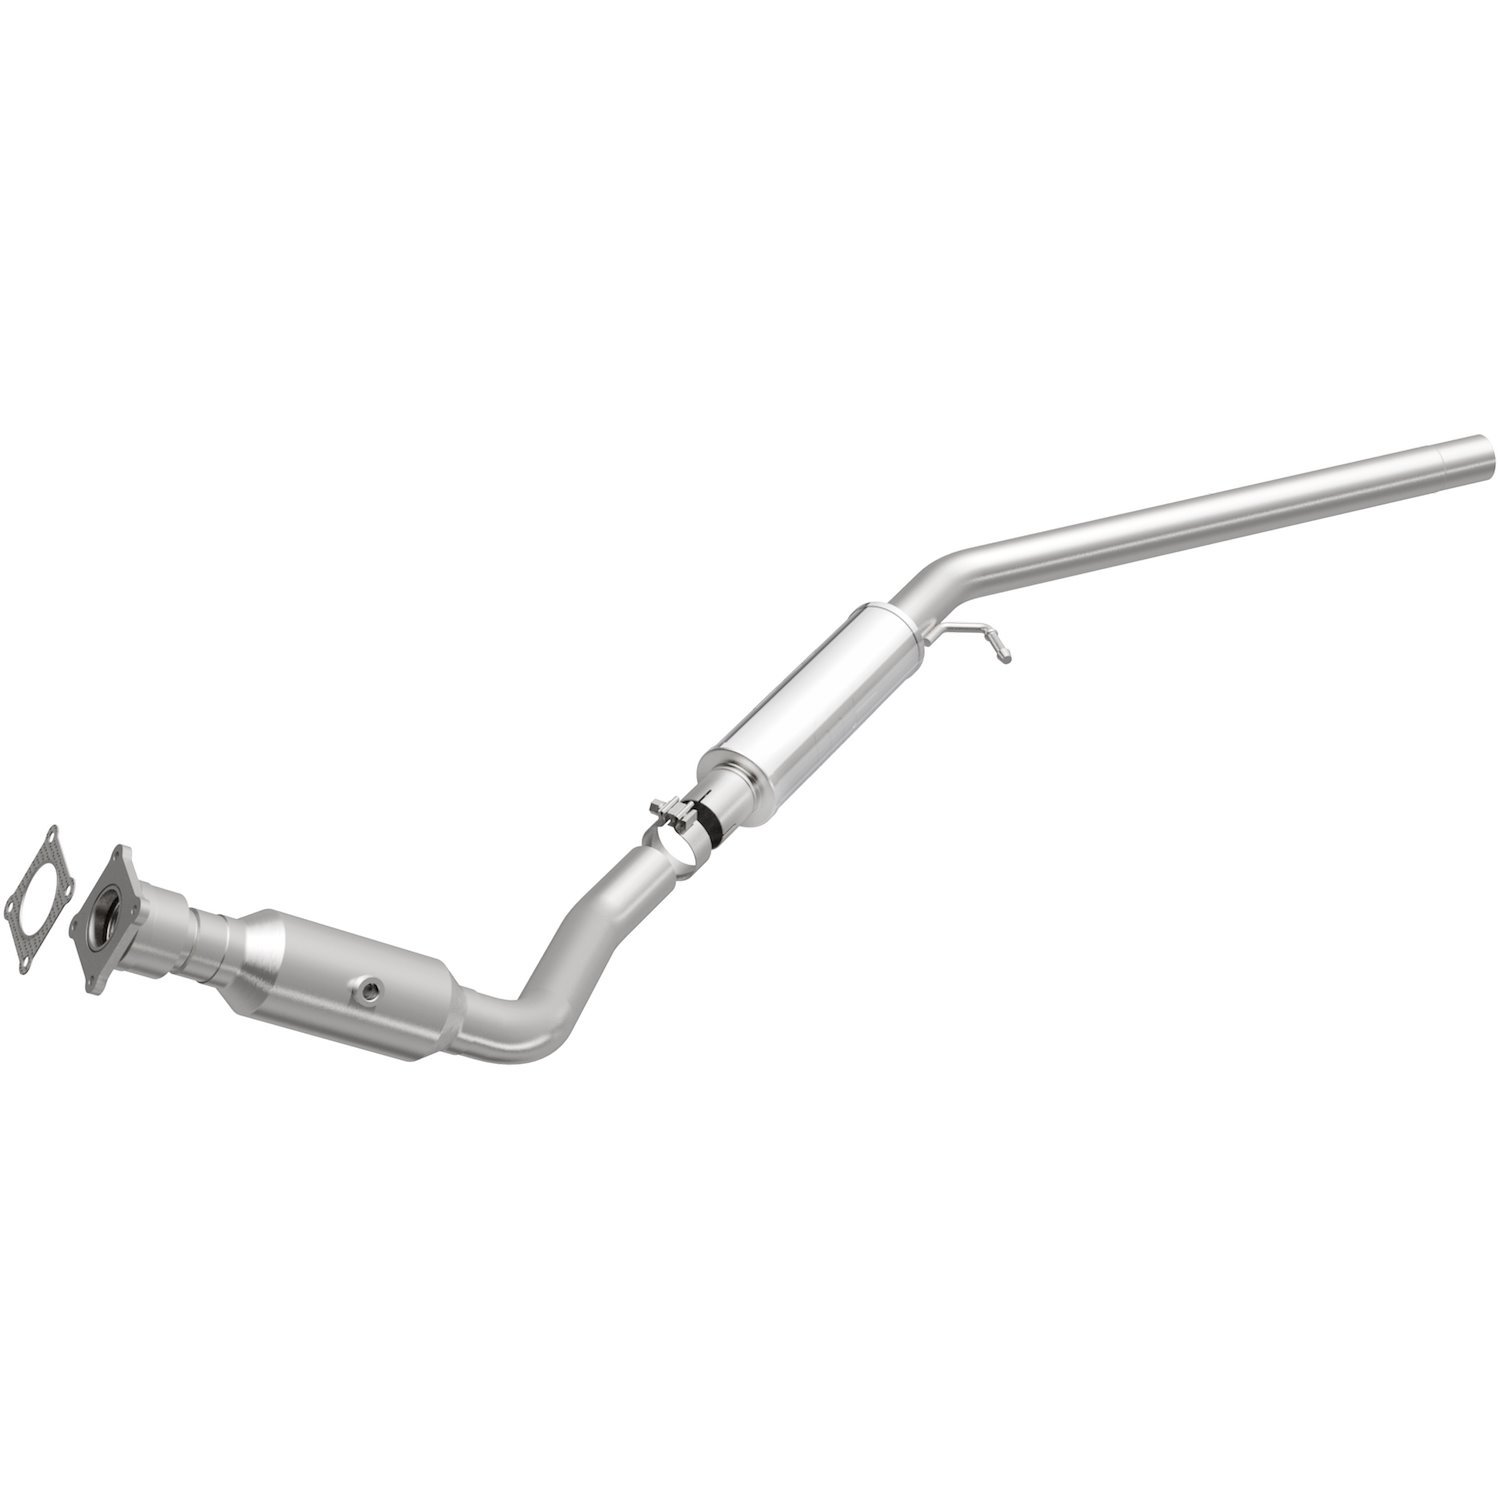 OEM Grade Federal / EPA Compliant Direct-Fit Catalytic Converter 49448